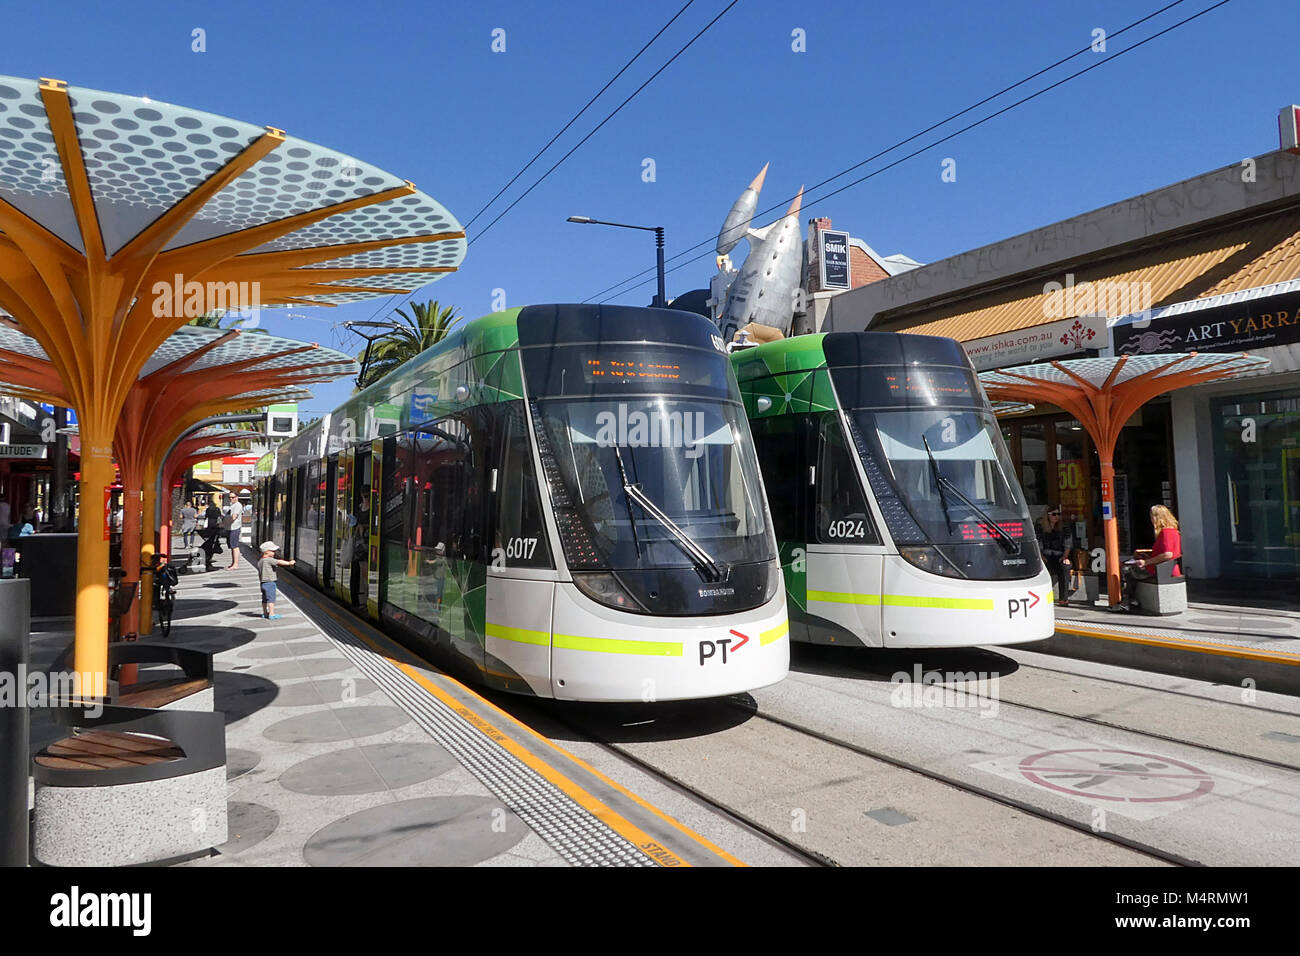 St Kilda, Melbourne, Australia: March 05, 2017: Two electric trams stationary at the Acland Street tram stop in St Kilda. Stock Photo